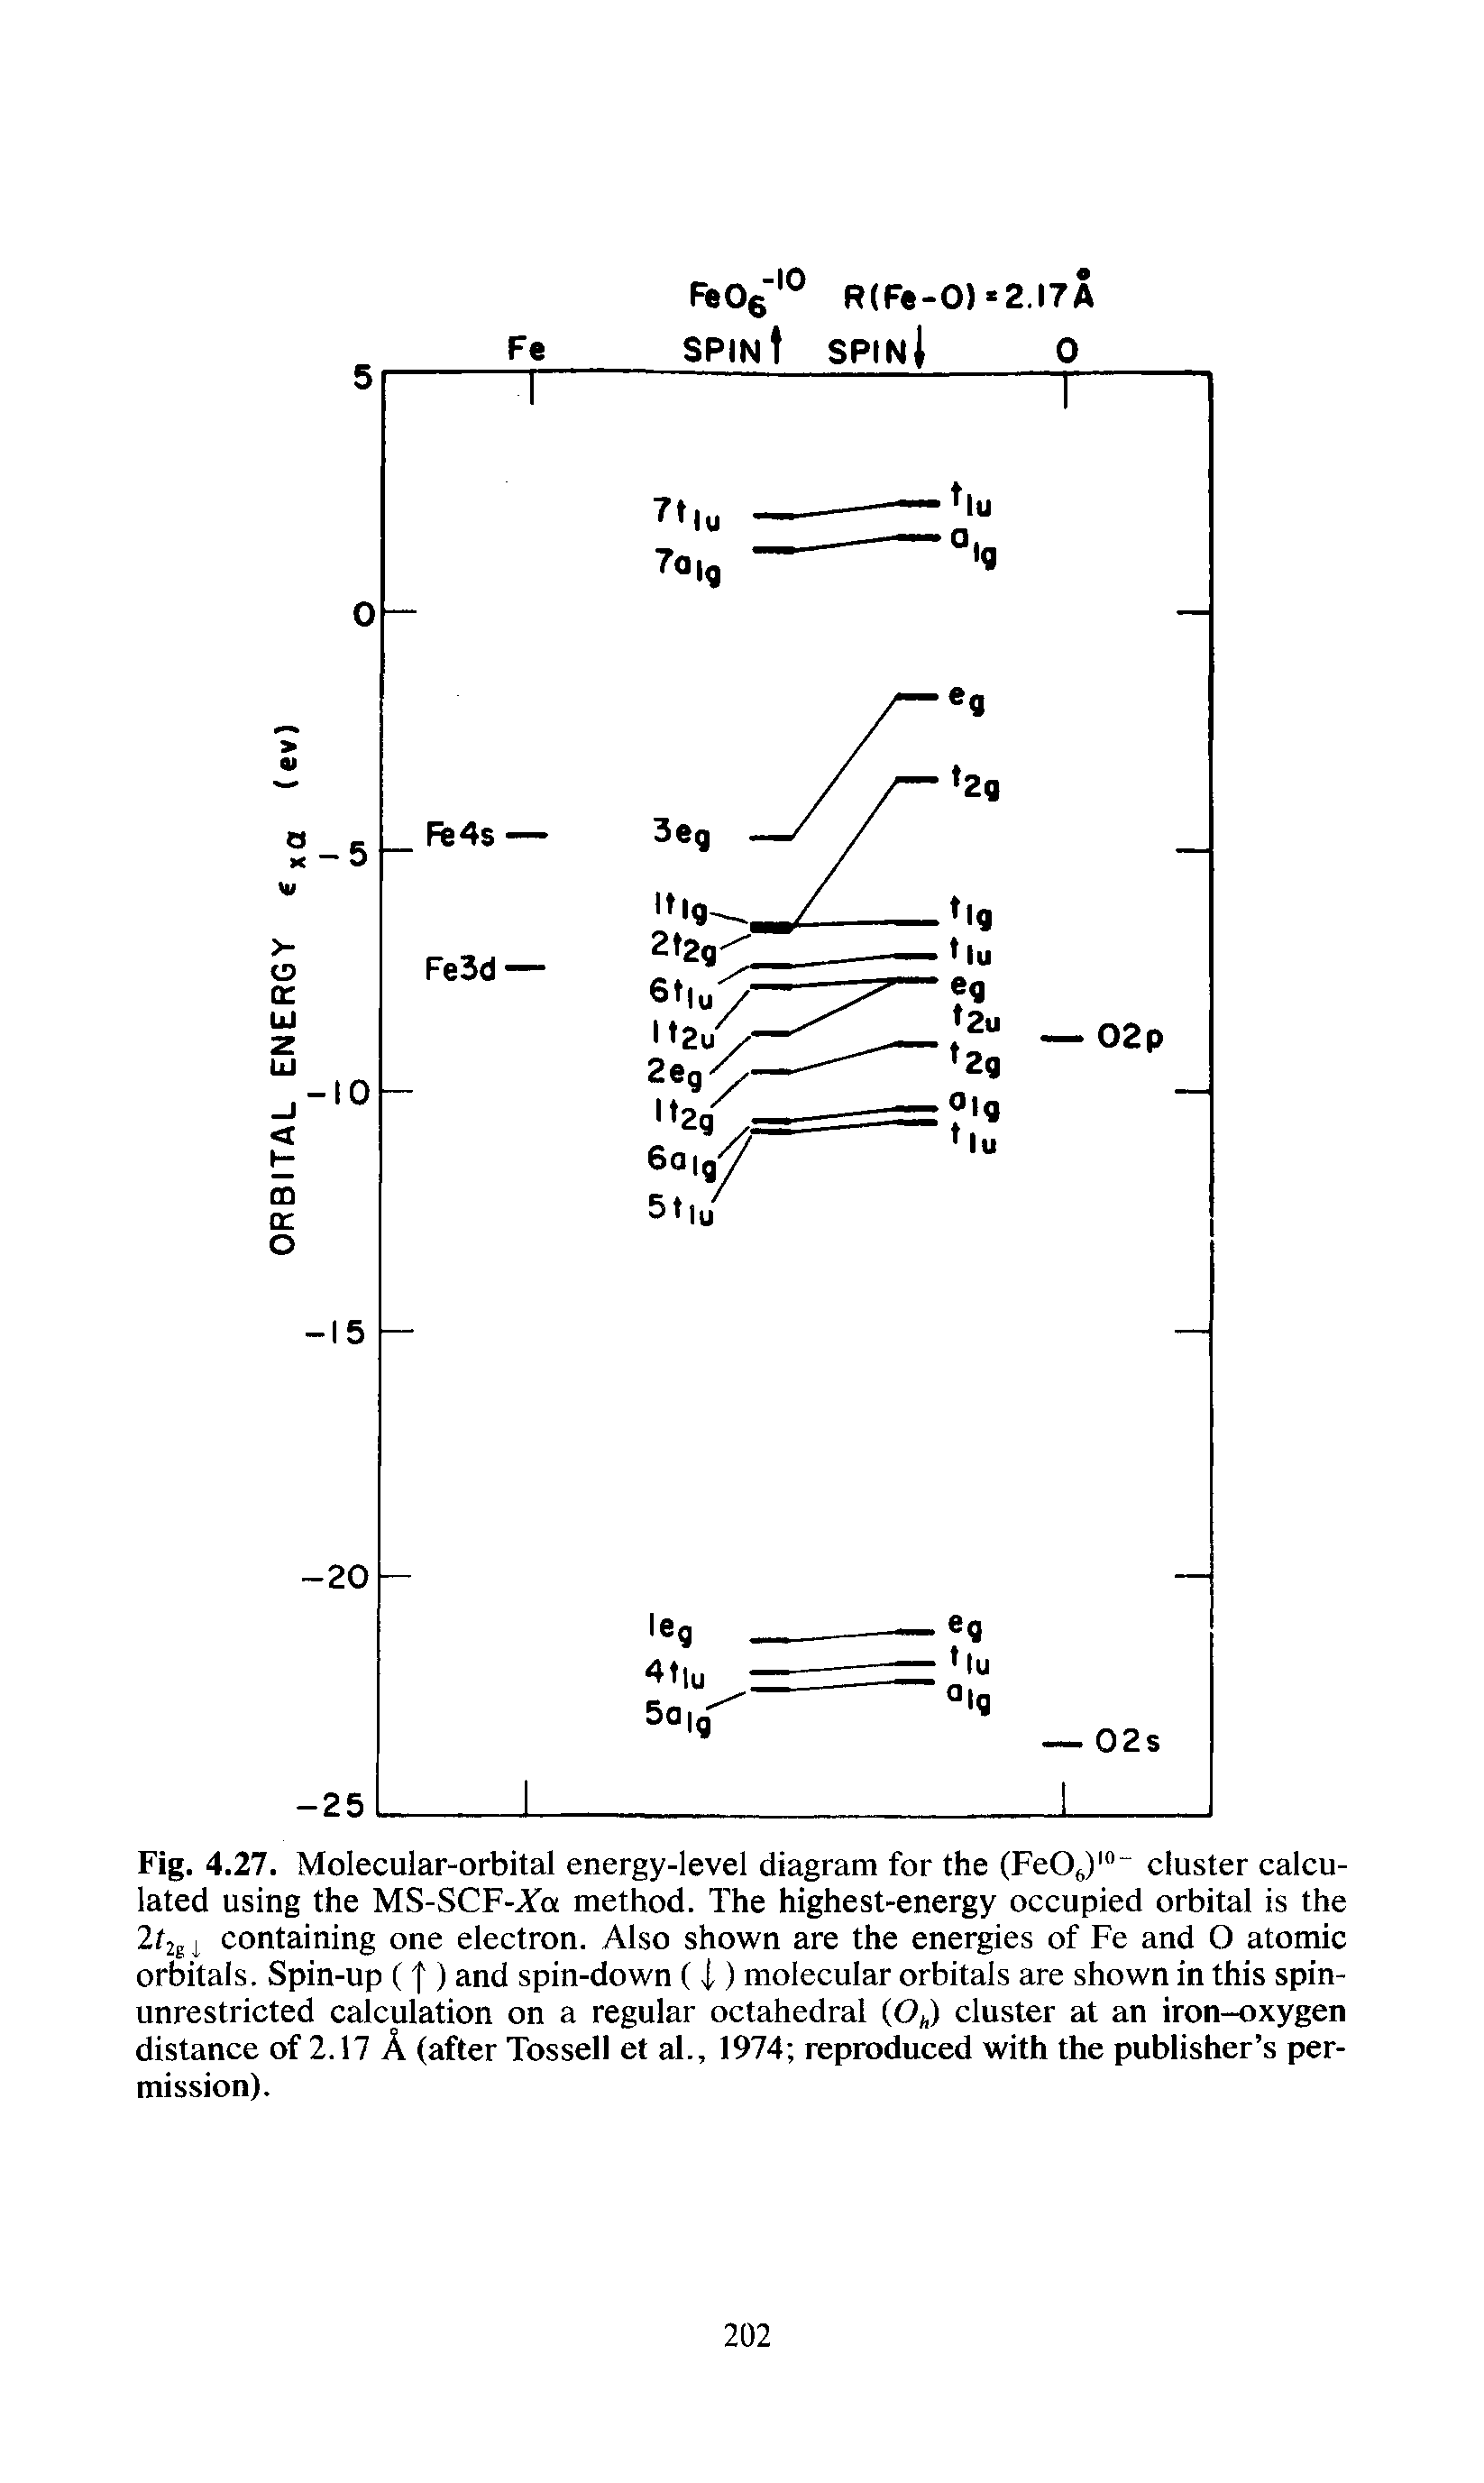 Fig. 4.27. Molecular-orbital energy-level diagram for the (FeO,) " cluster calculated using the MS-SCF-Jfa method. The highest-energy occupied orbital is the 2 2g i containing one electron. Also shown are the energies of Fe and O atomic orbitals. Spin-up (f ) and spin-down ( i ) molecular orbitals are shown in this spin-unrestricted calculation on a regular octahedral (O ) cluster at an iron-oxygen distance of 2.17 A (after Tossell et al., 1974 reproduced with the publisher s permission).